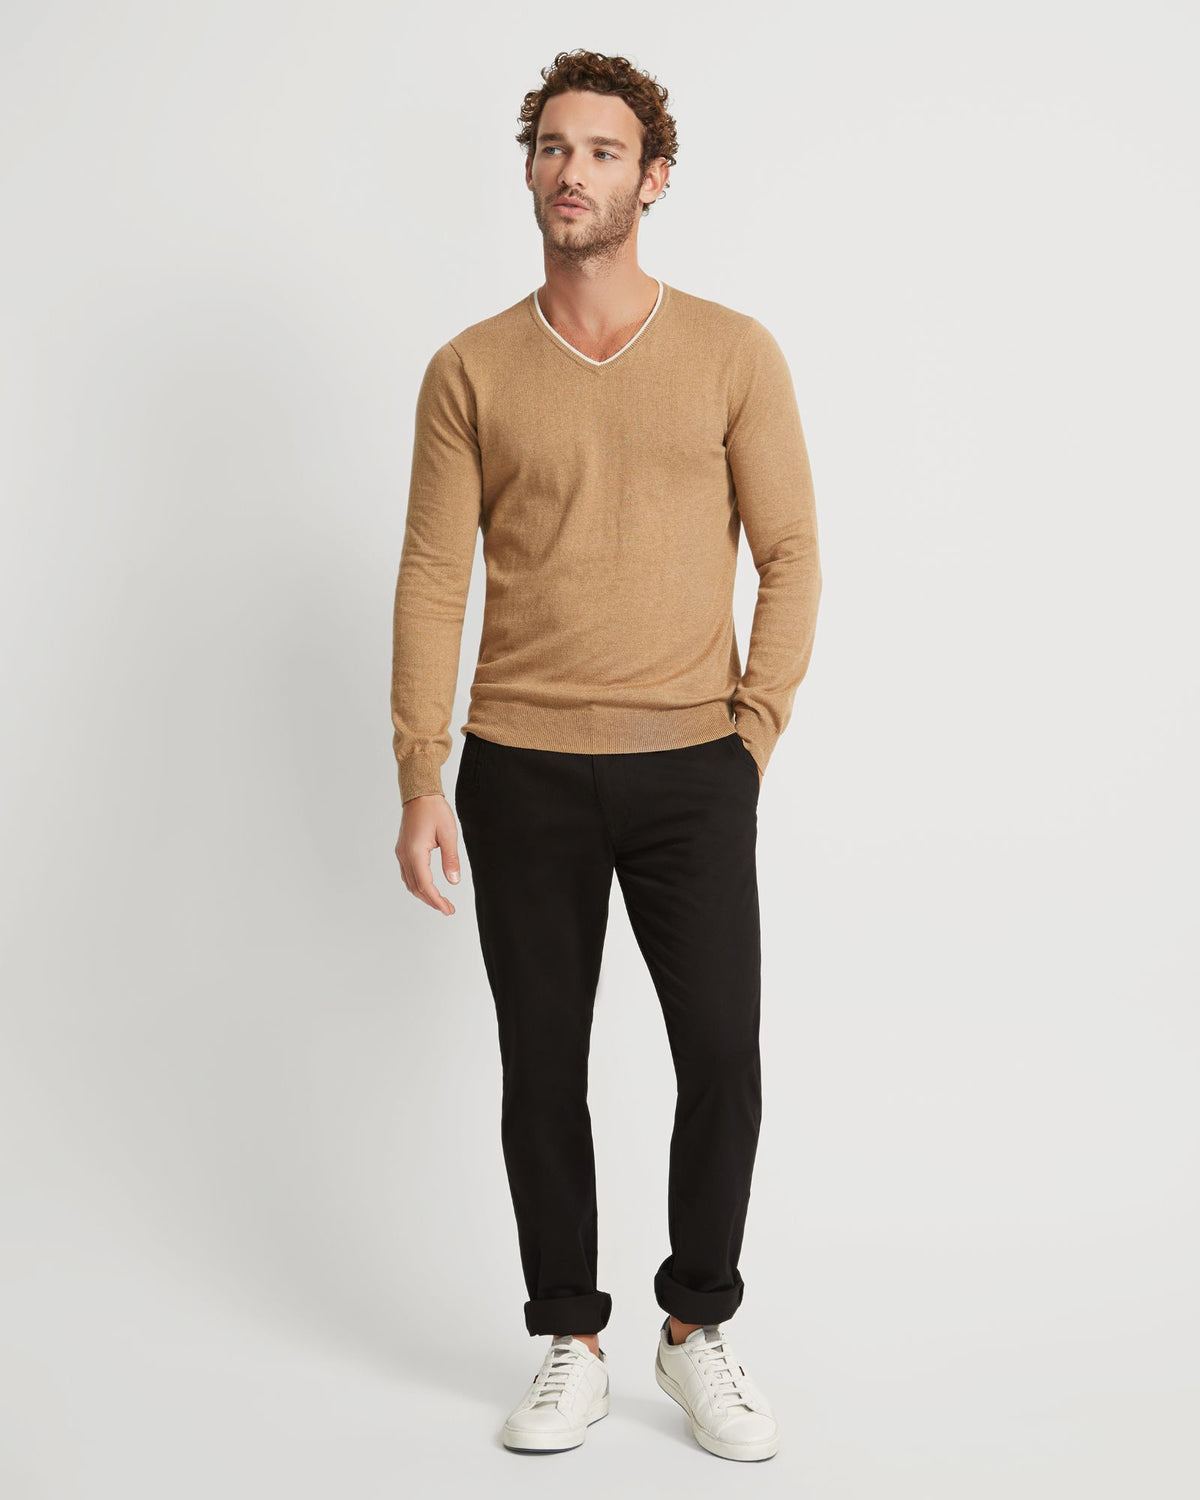 TIPPING V-NECK KNITTED TOP MENS KNITWEAR